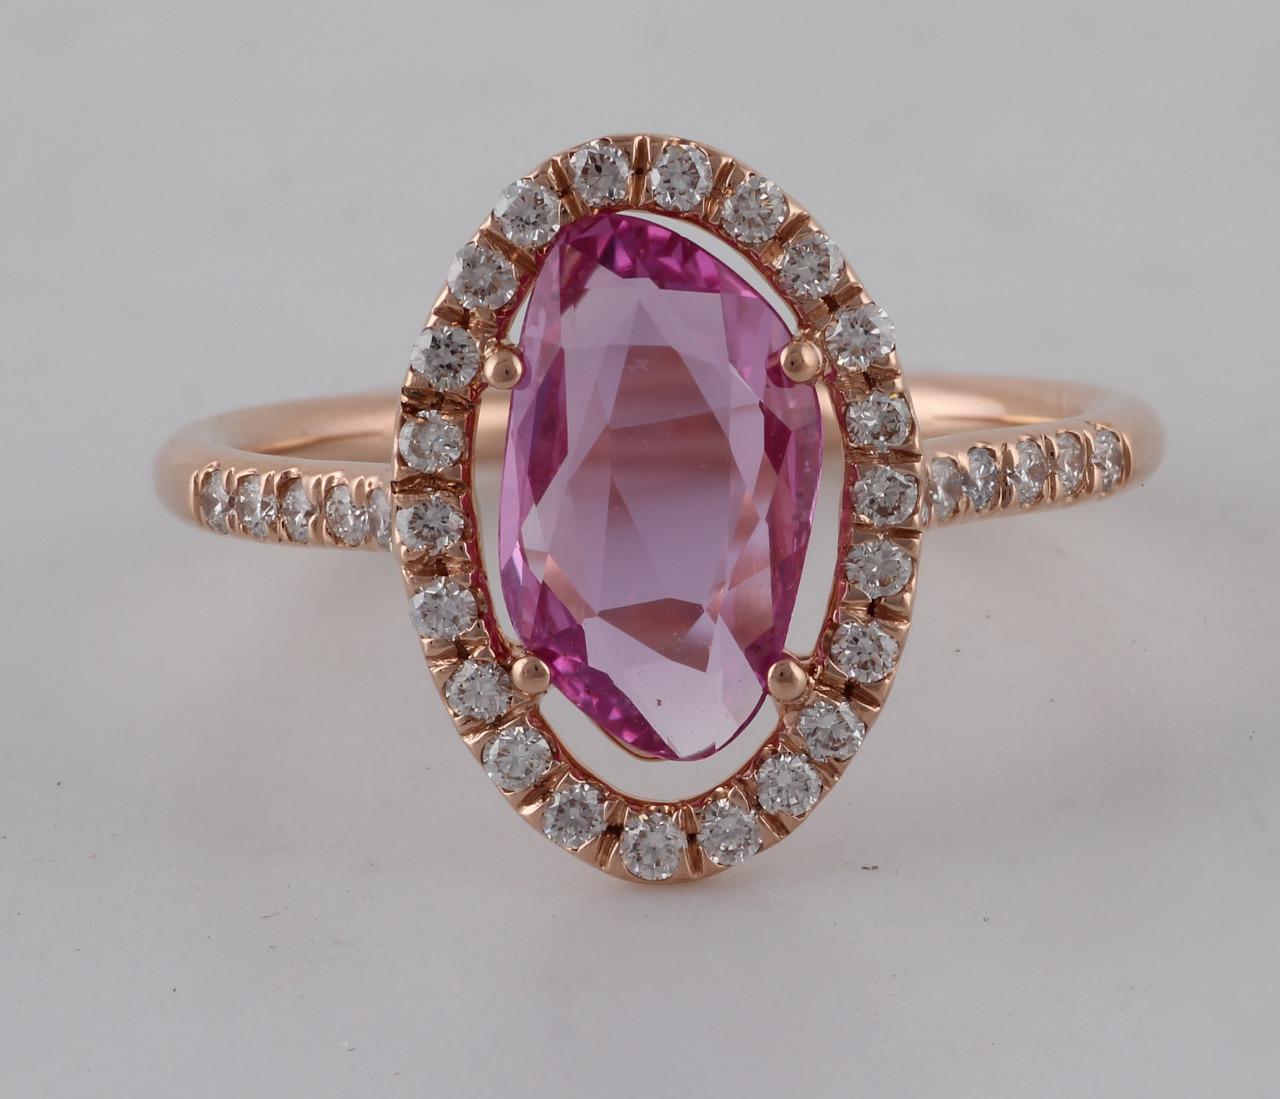 A beautiful, modern looking suite using around 23 carats of natural Pink Sapphire and 8 carats of Diamond, all set in 18k Rose Gold. The length of the chain / bracelet is adjustable.  The items in the set can be bought separately or together.